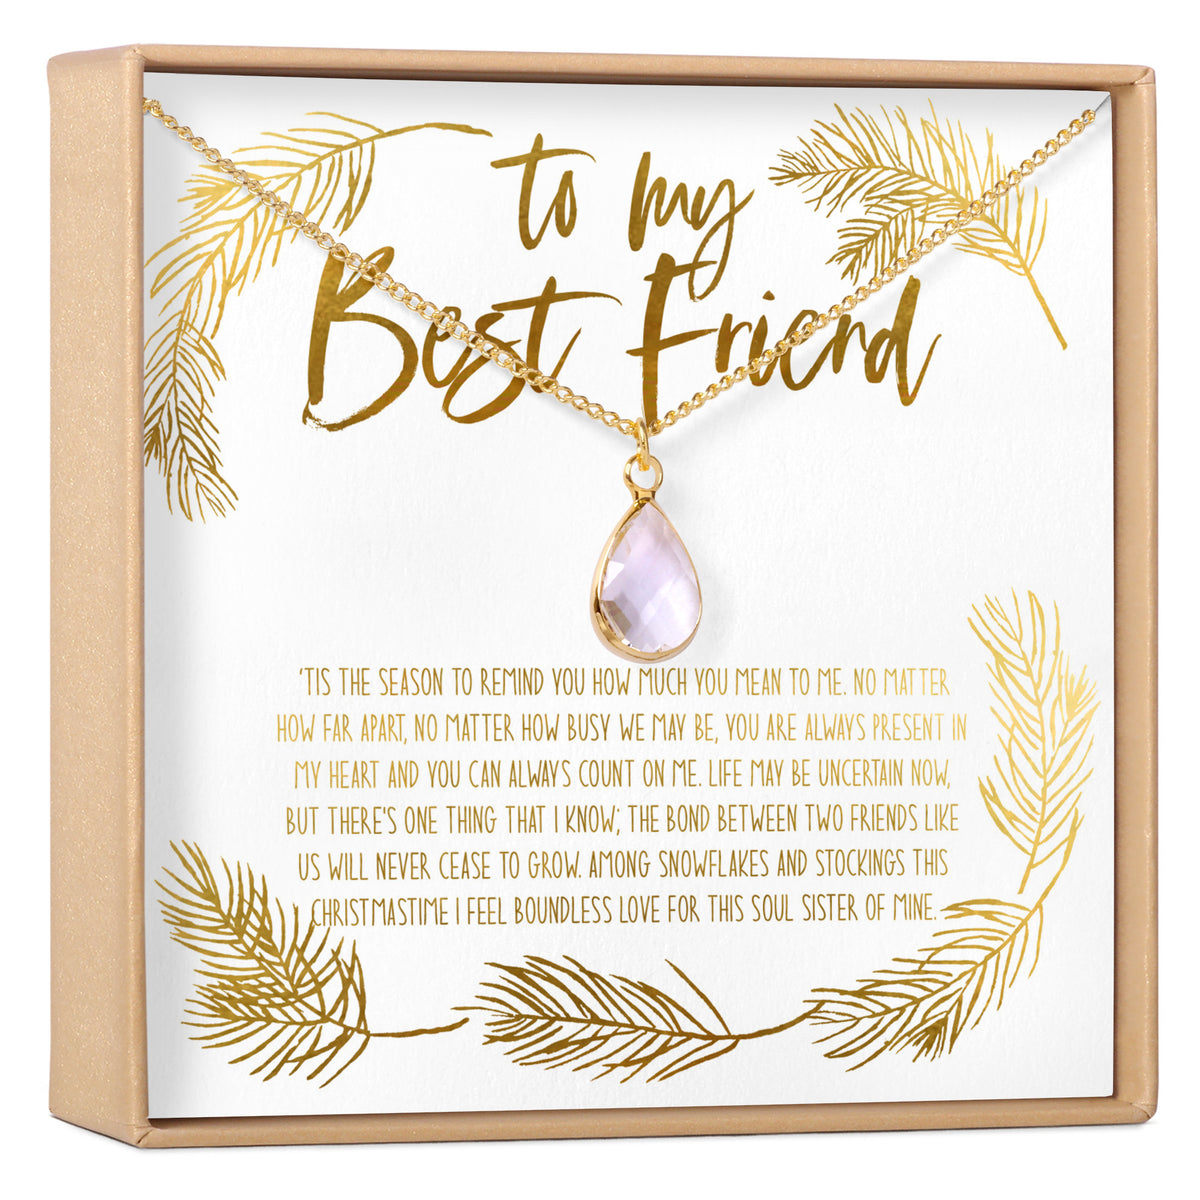 Friend Gifts For Women Best Friend Funny Friendship Gift For Women Under 10  15 Dollars Wood Plaques Sign Gift For Her Womens Special Friends Bff 10  Gifts For Woman Prime New Funny